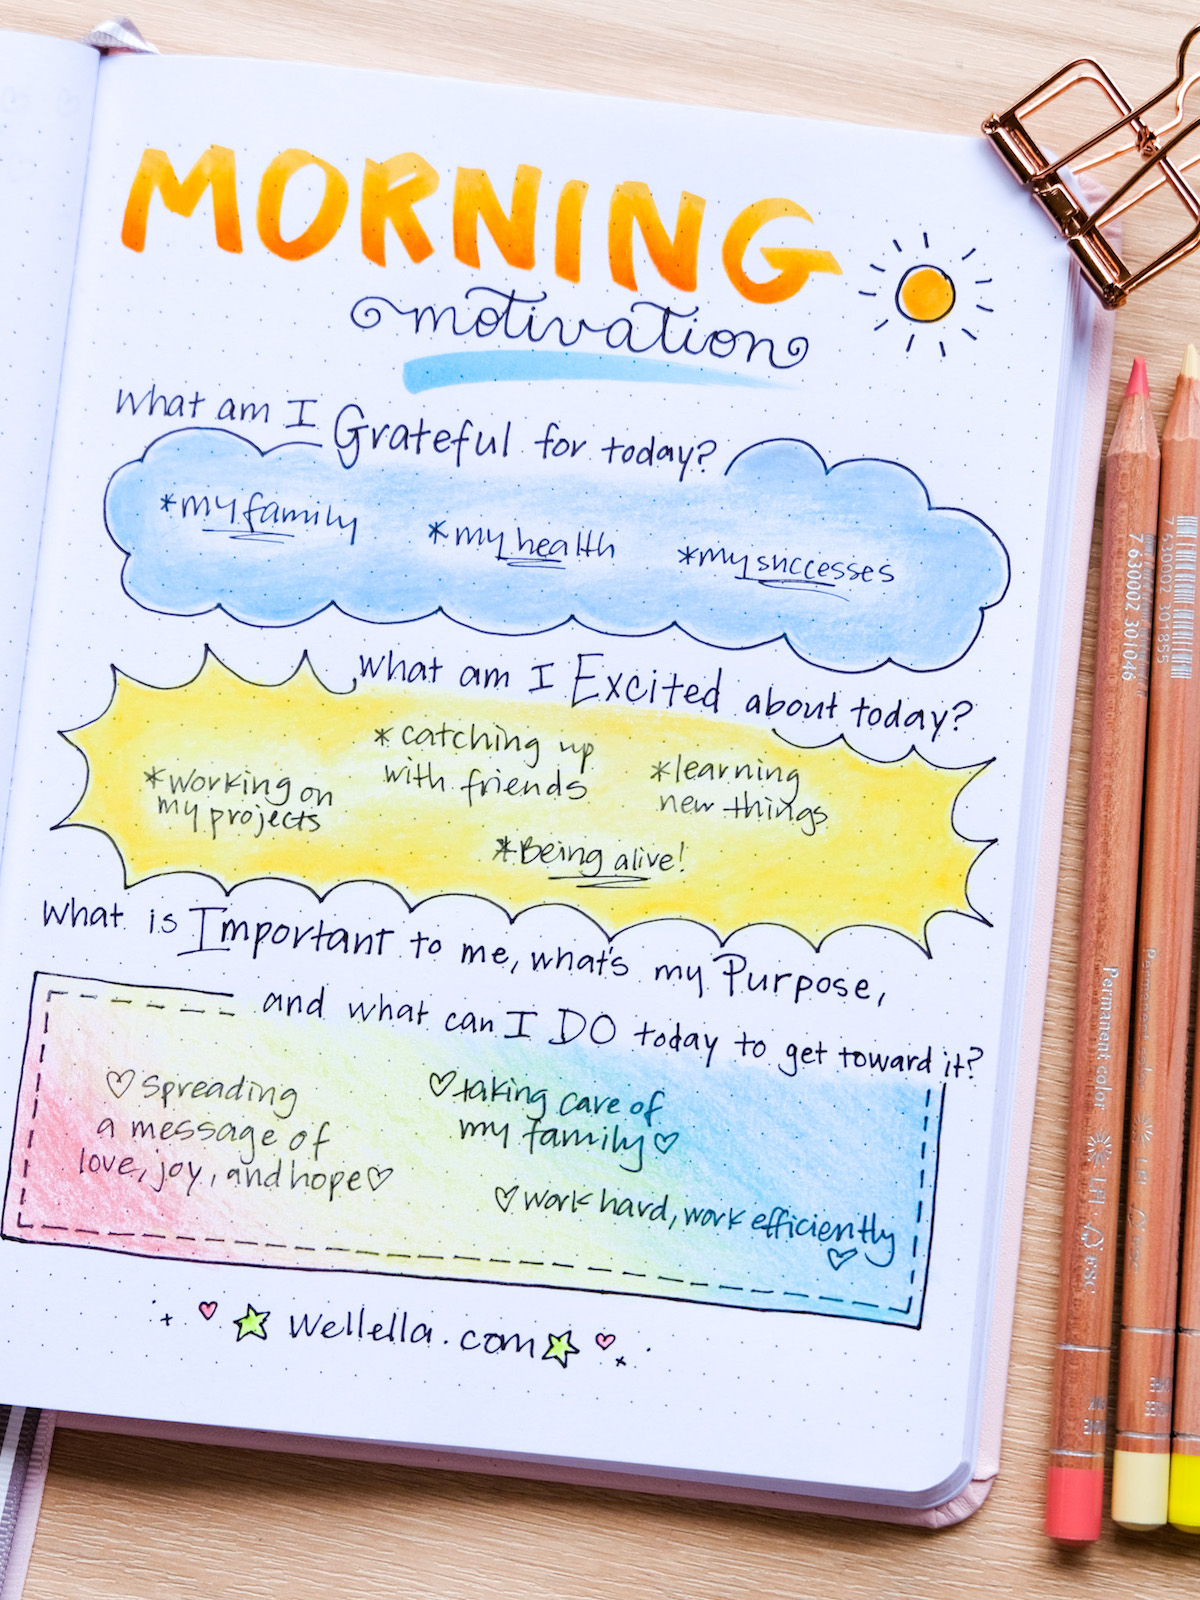 An open journal on a table with colored pencils beside it. On the page it says Morning Motivation with some journal prompts illustrated with colored pencil.